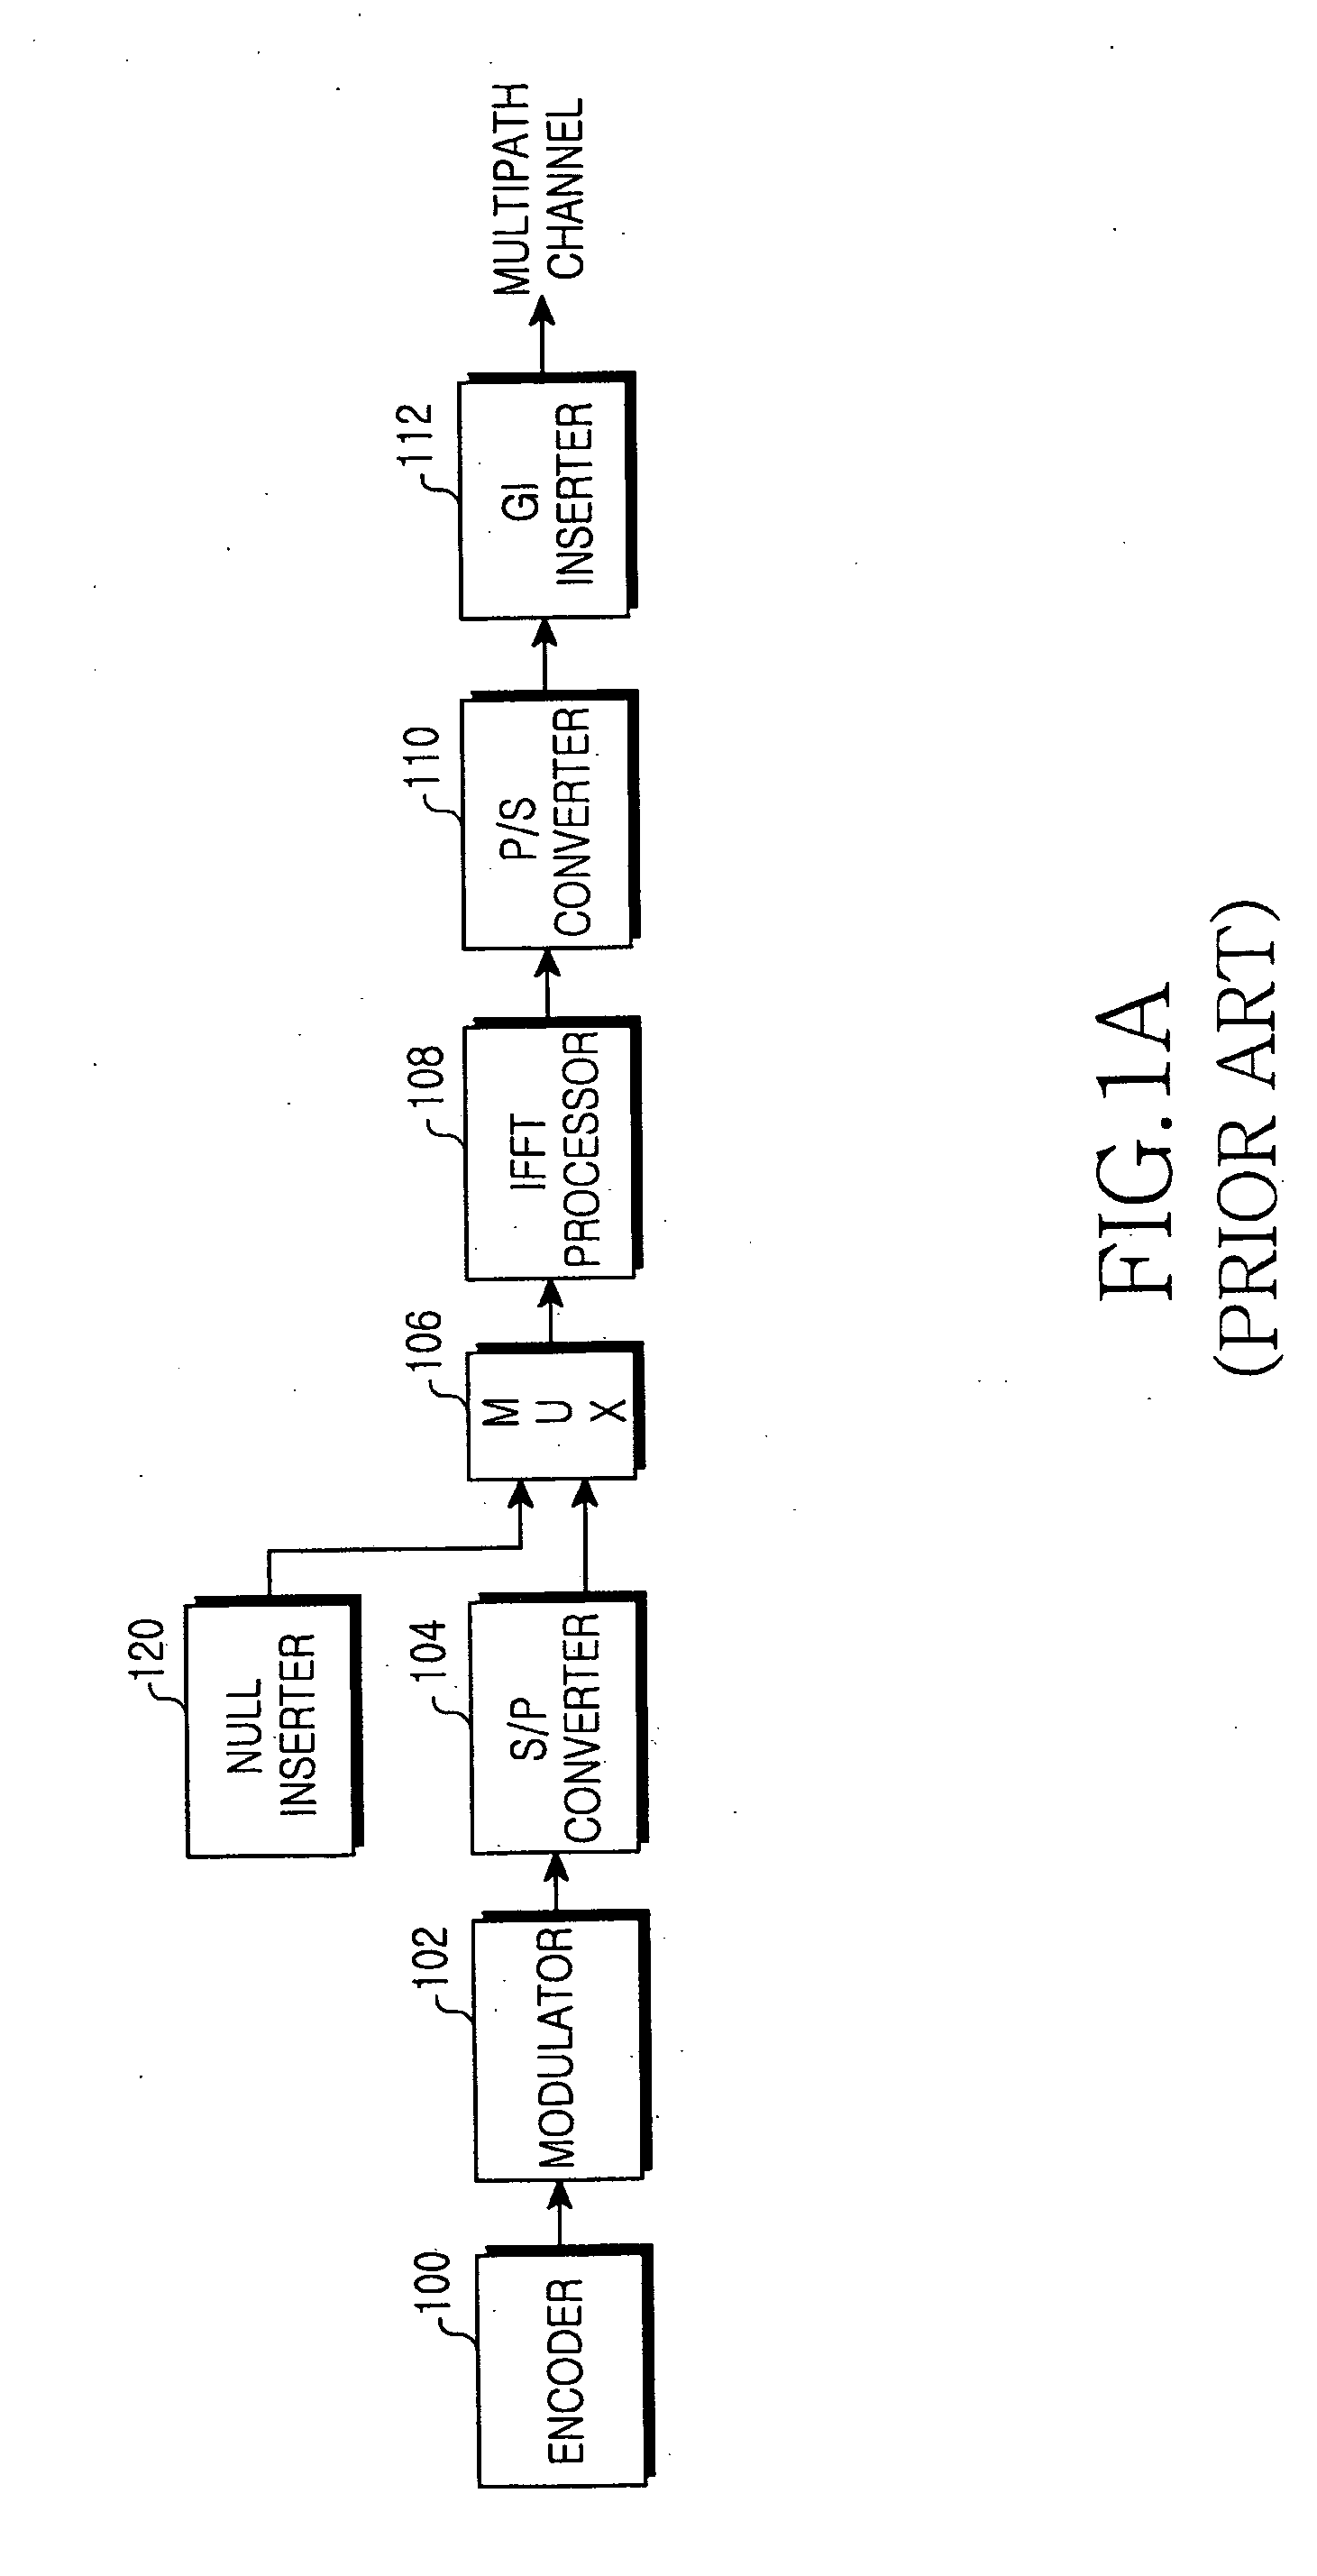 Apparatus and method for transmitting and receiving a signal in an orthogonal frequency division multiplexing system